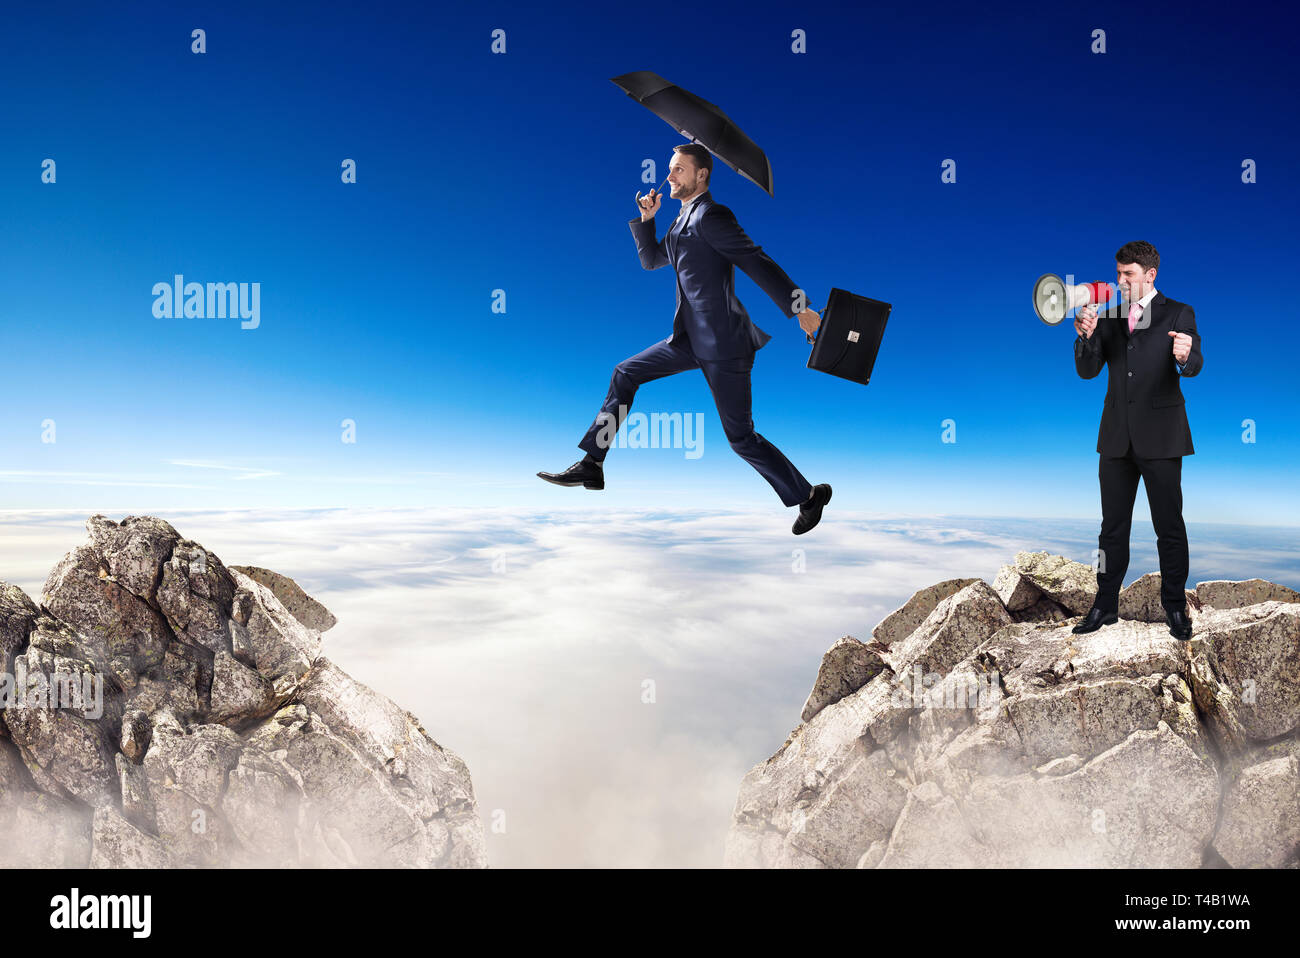 Businessman jumping over a cliff and collegue is cheering with bullhorn. Stock Photo